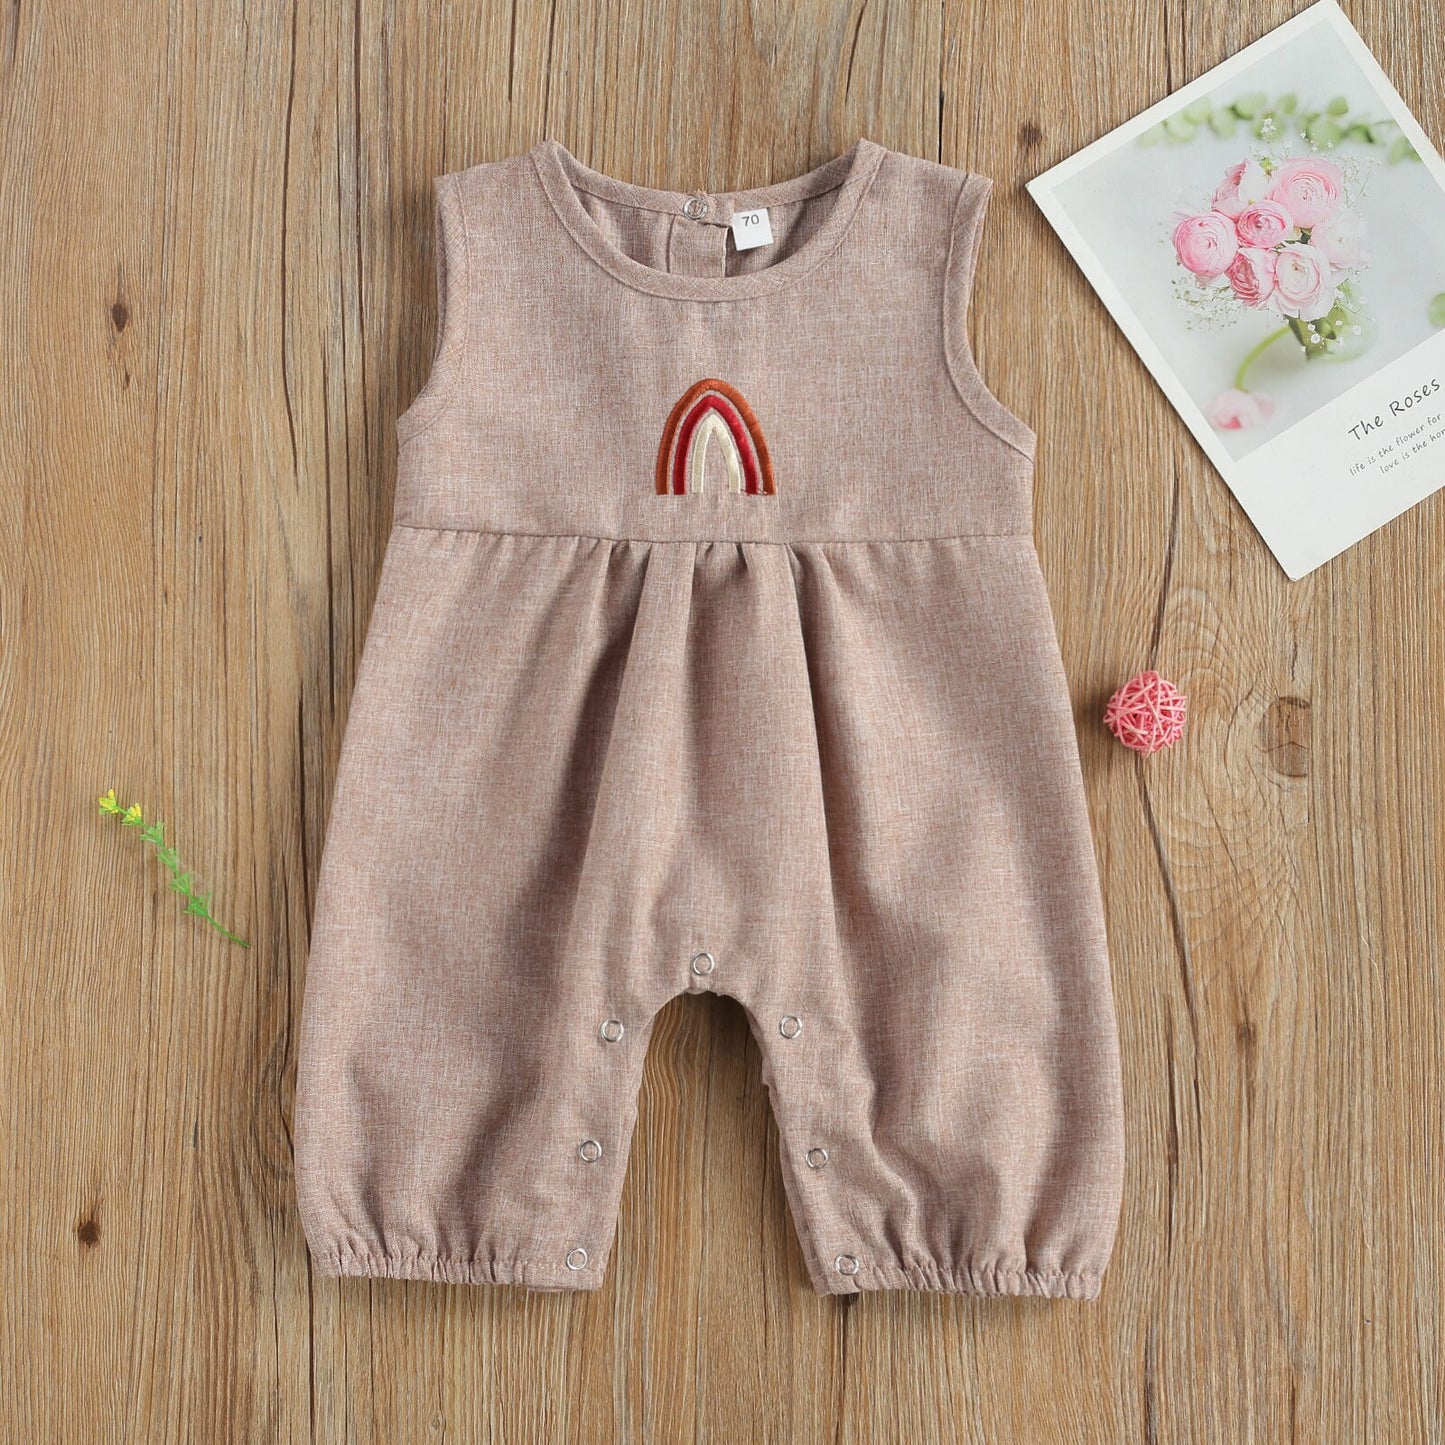 Baby Romper/Clothes Sets Rainbow Print Tops Shorts/Sleeveless Jumpsuits